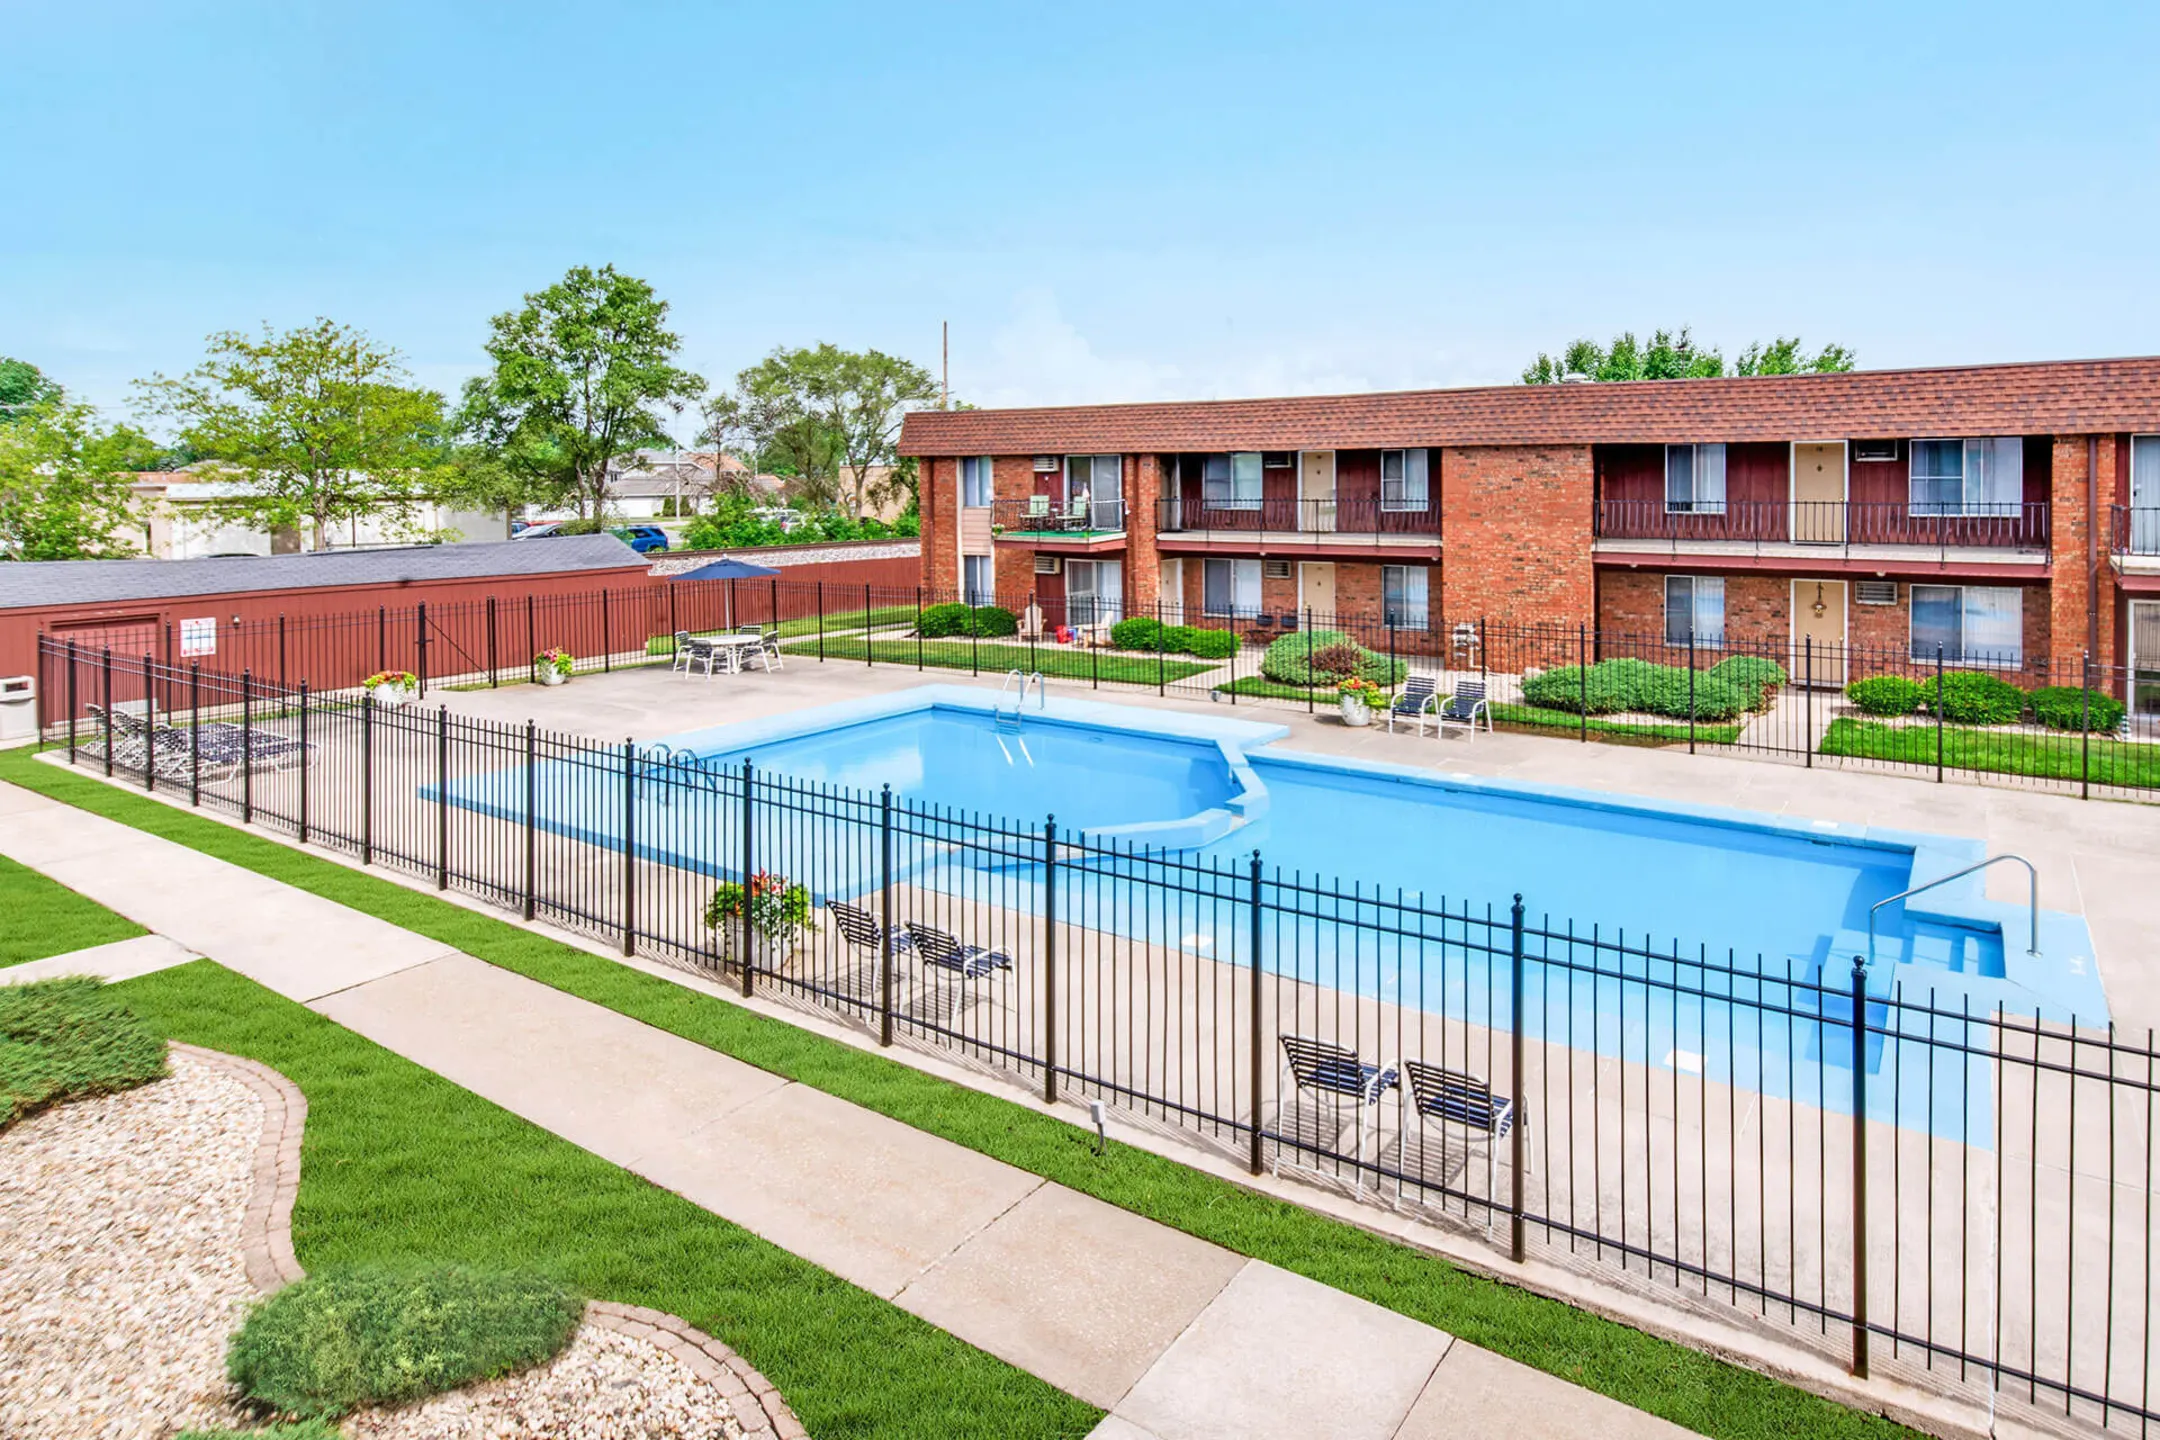 Pool - Barberry Apartments - Dyer, IN